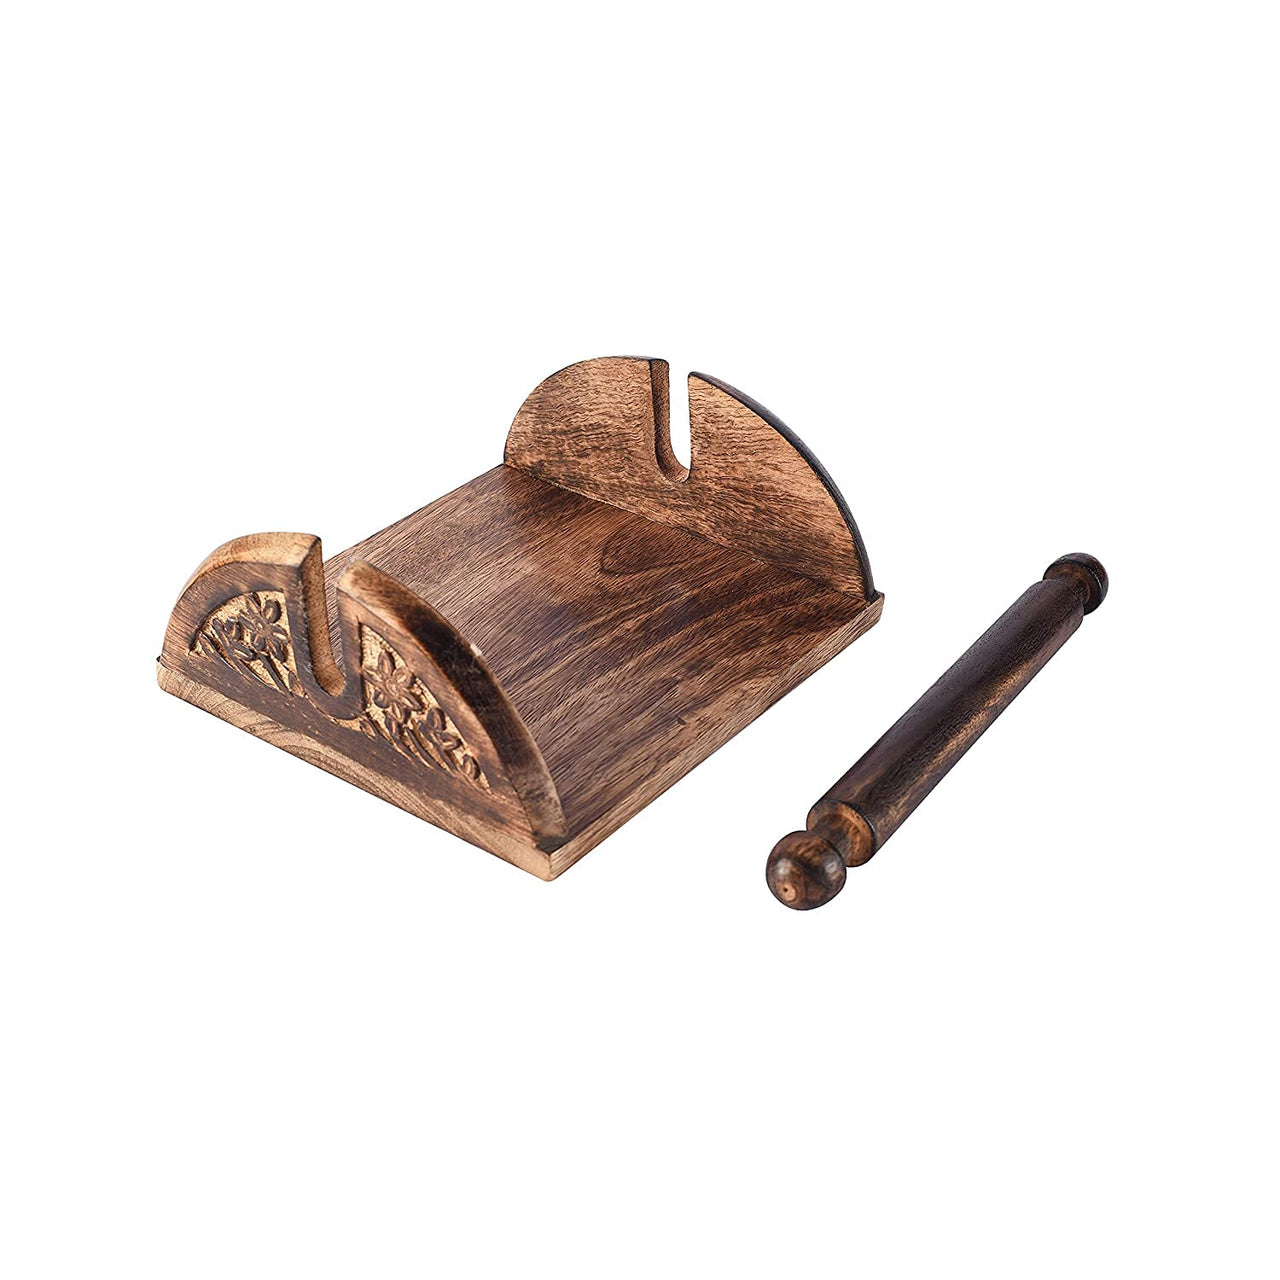 Antique Wooden Carved Tissue Paper Holder Decorative and Stylish Wooden Tissue Box for Car, Facial Paper Napkin Holder Case Dime Store